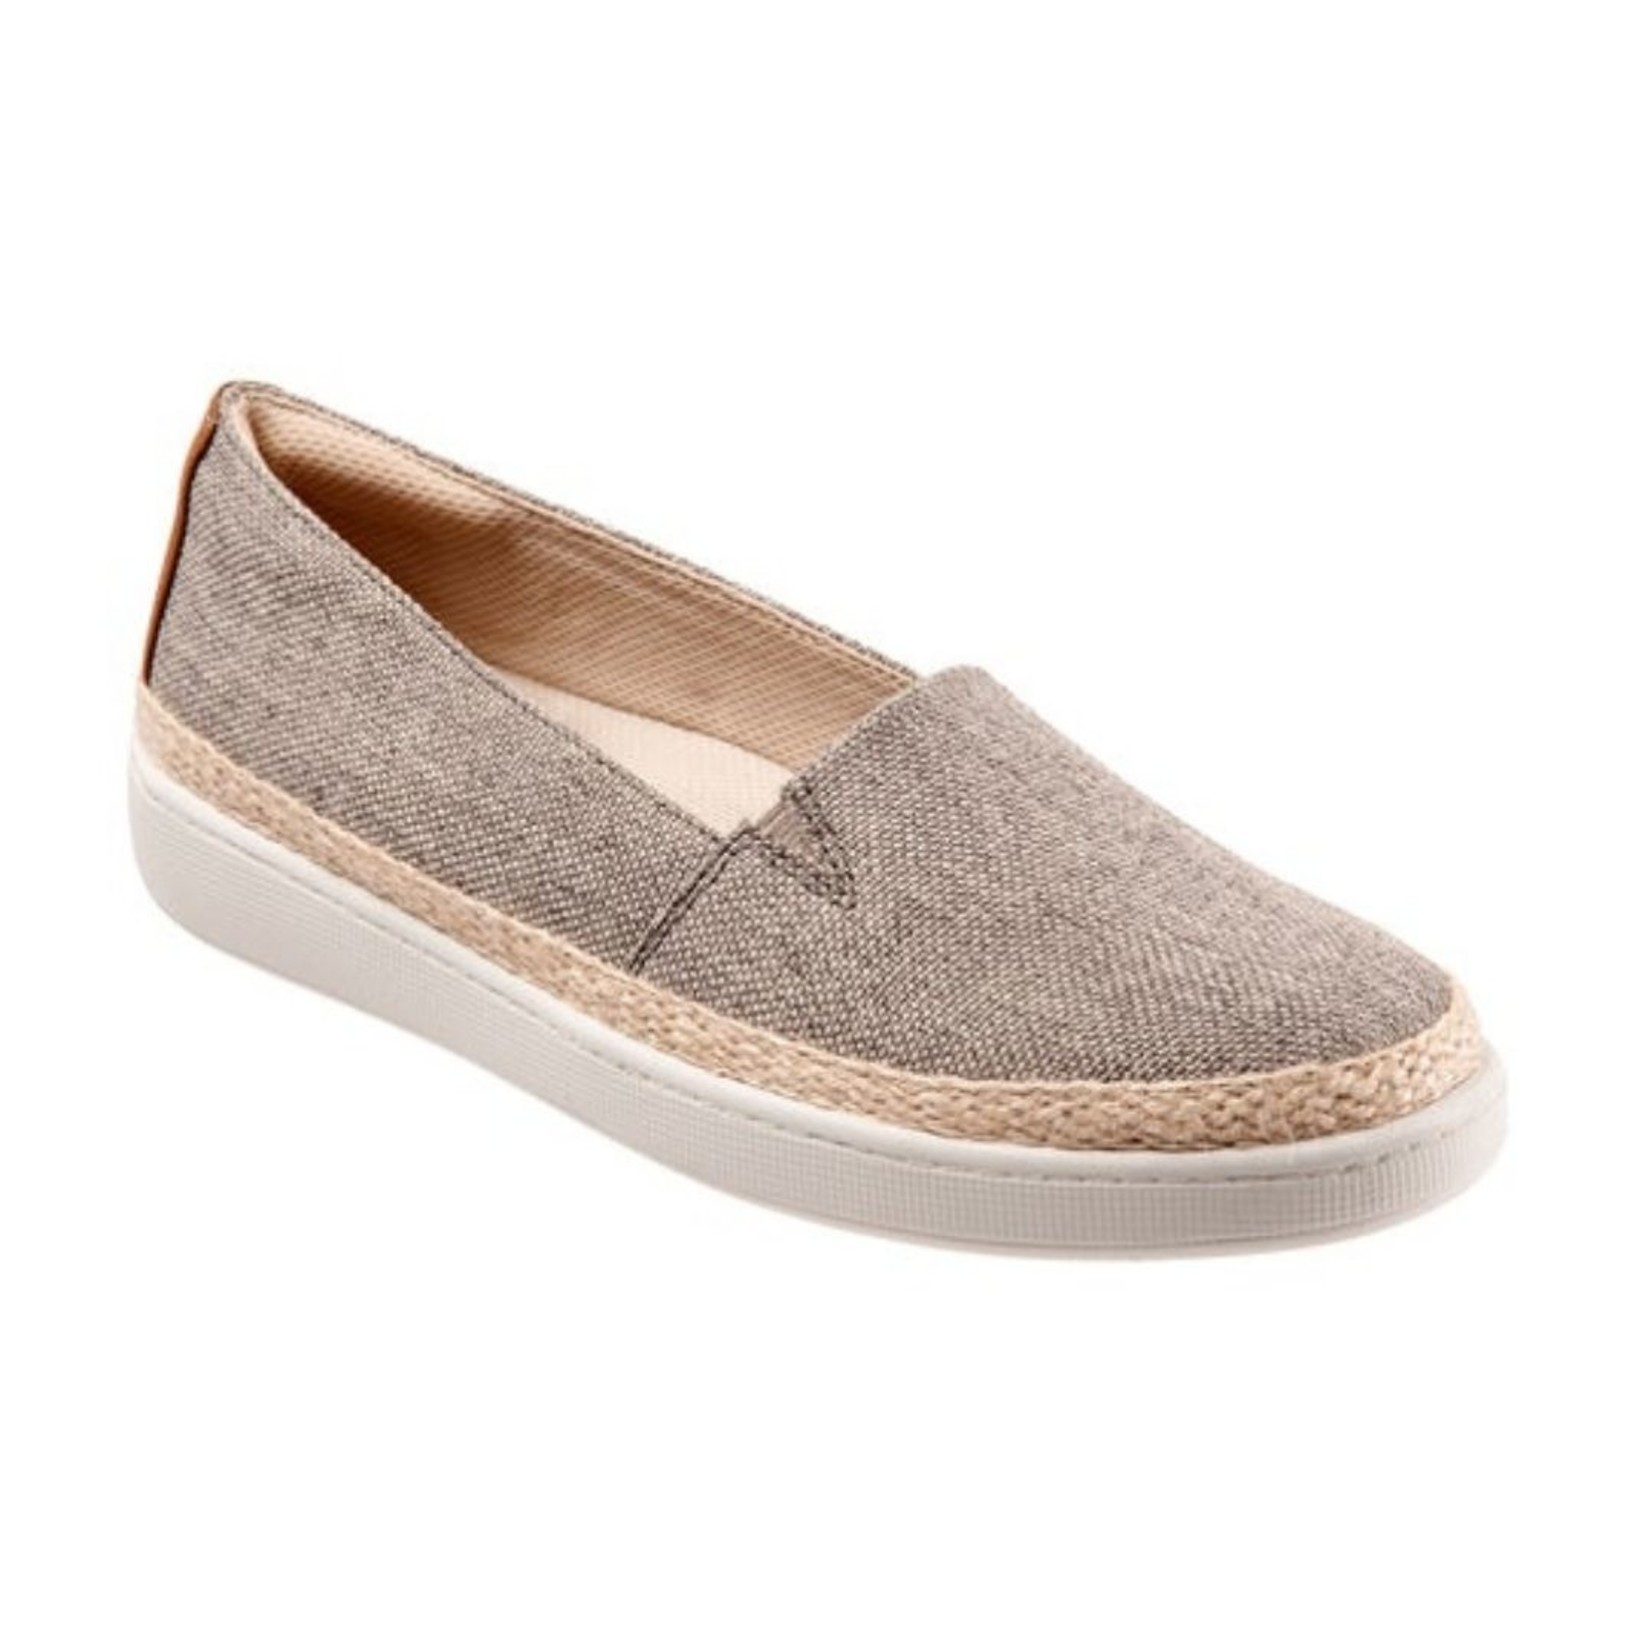 Trotters Trotters Accent Women’s Slip-On Shoes